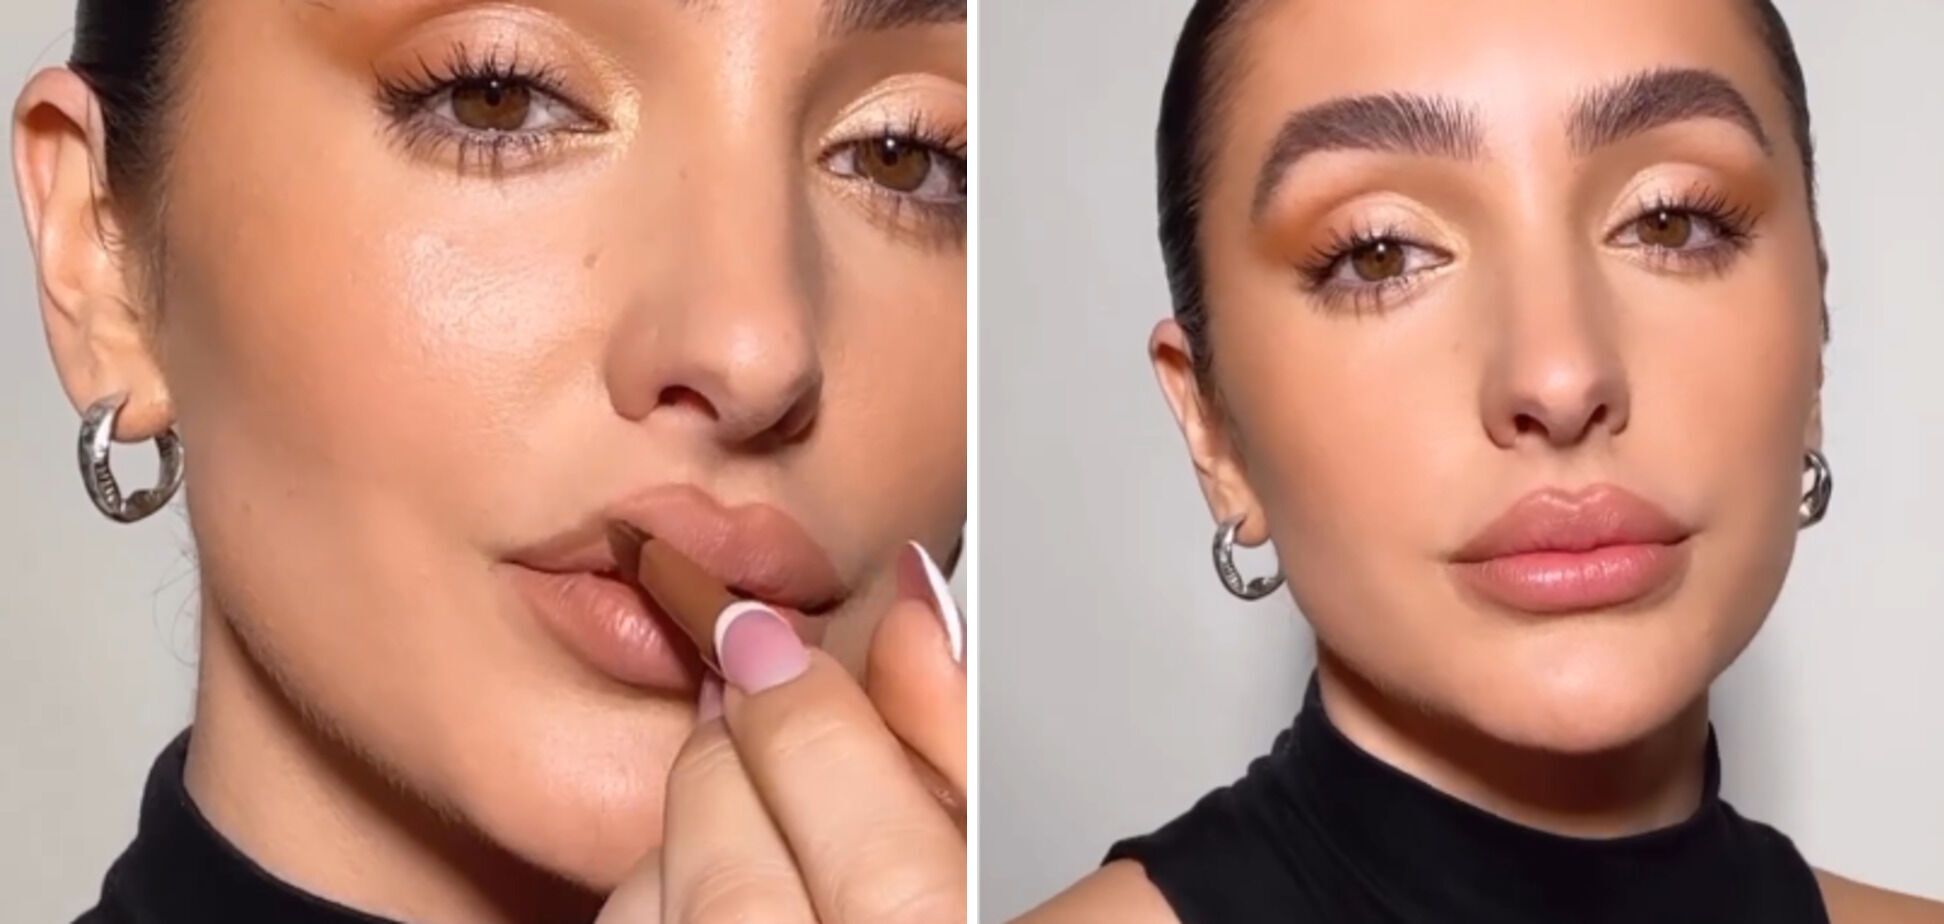 The Lip Flip technique will make your lips much fuller: how to do it